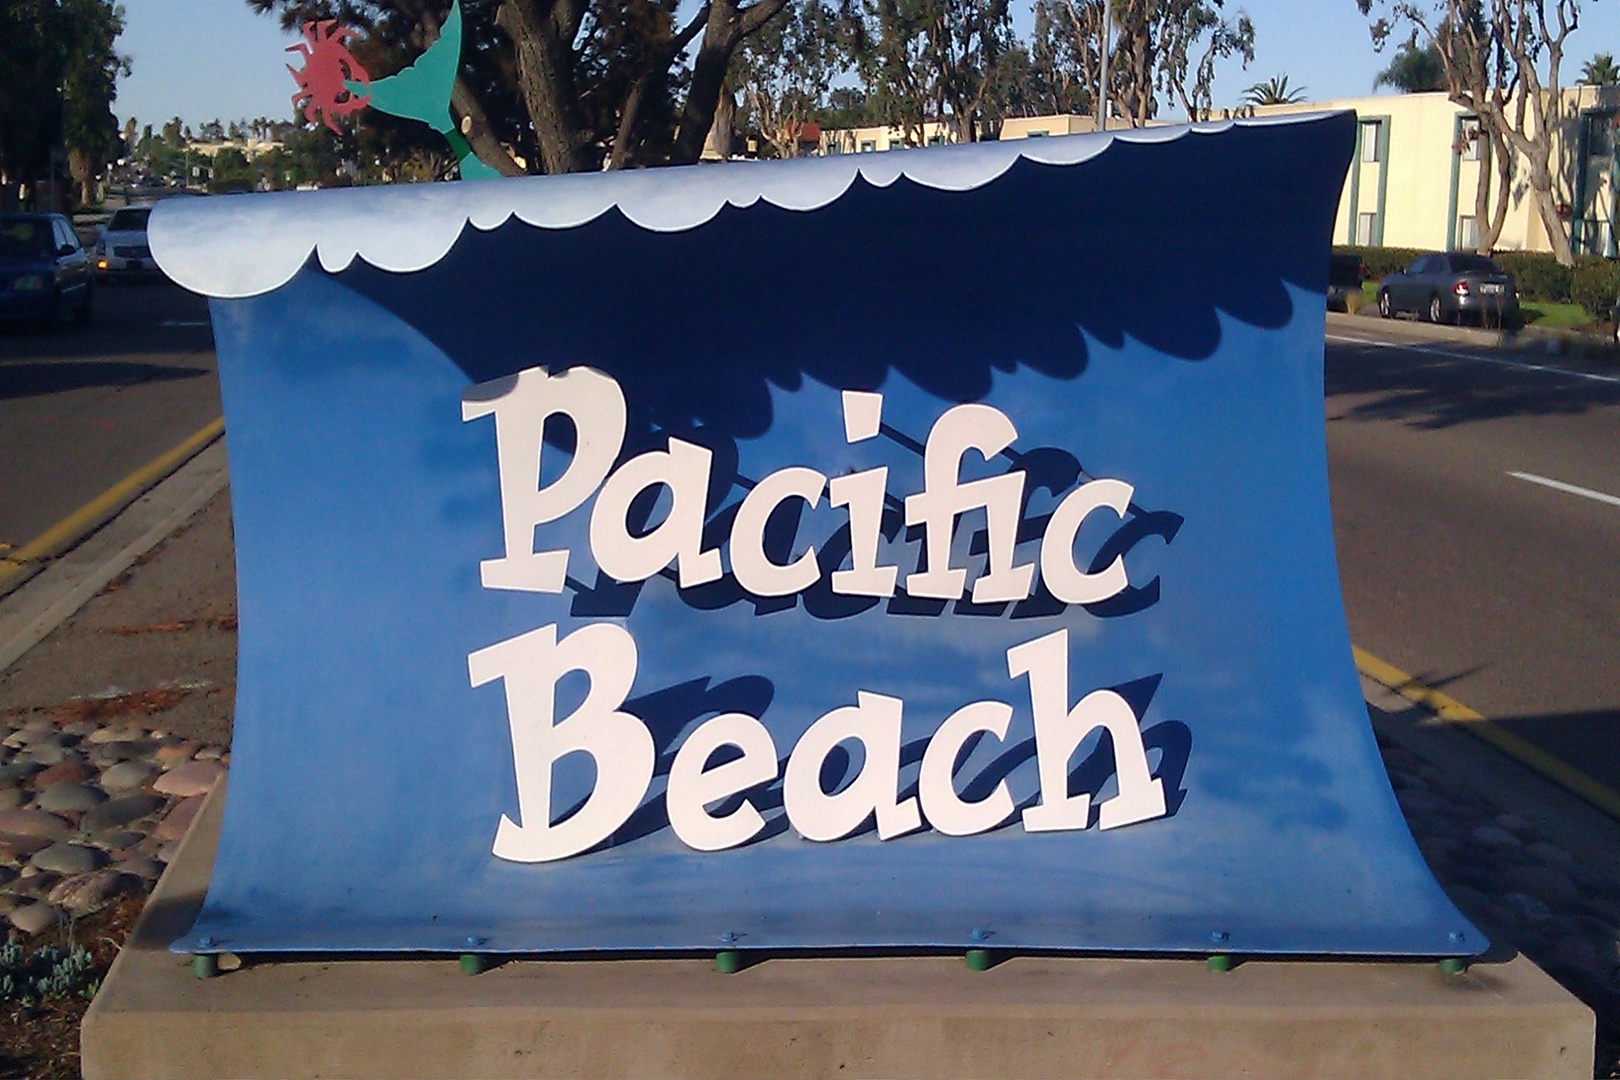 Time to vacation in Pacific Beach